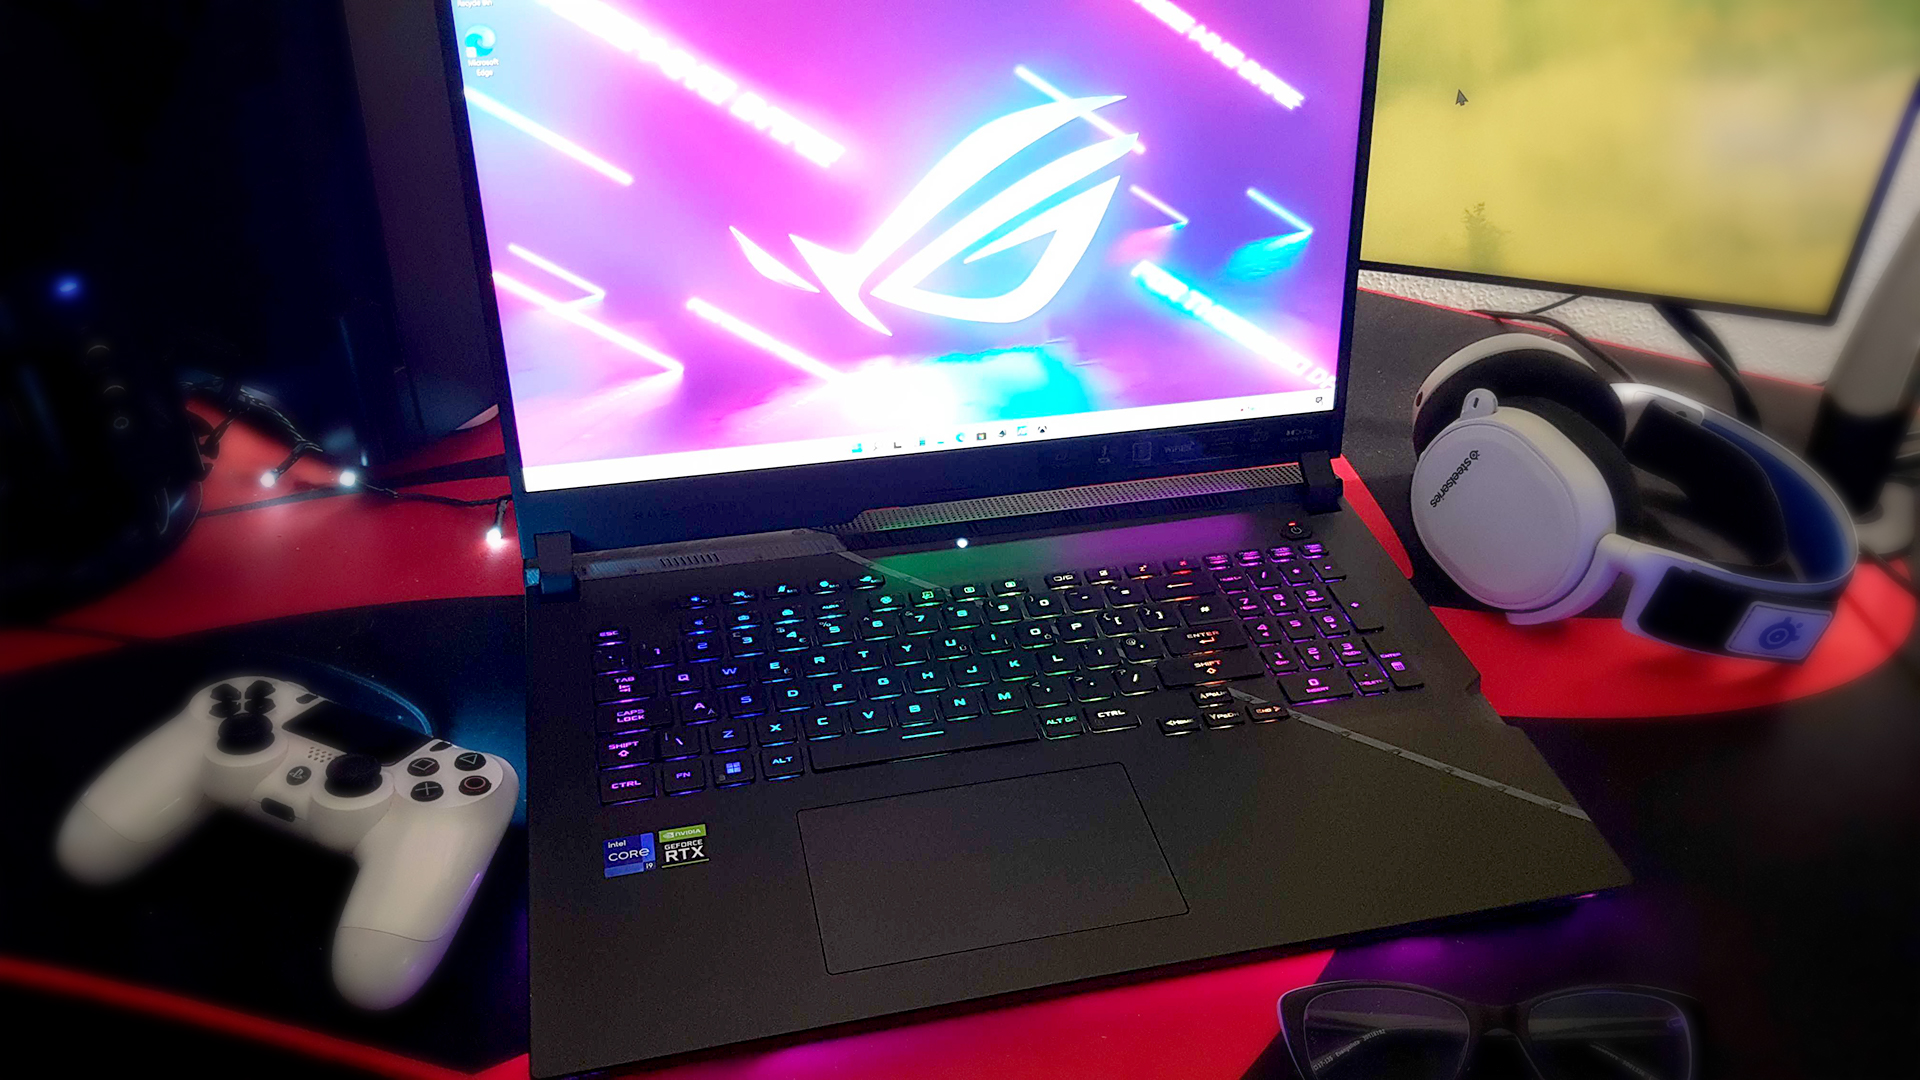 The Asus ROG Strix Scar 17 (2022) from the front, on a desk with some peripherals.